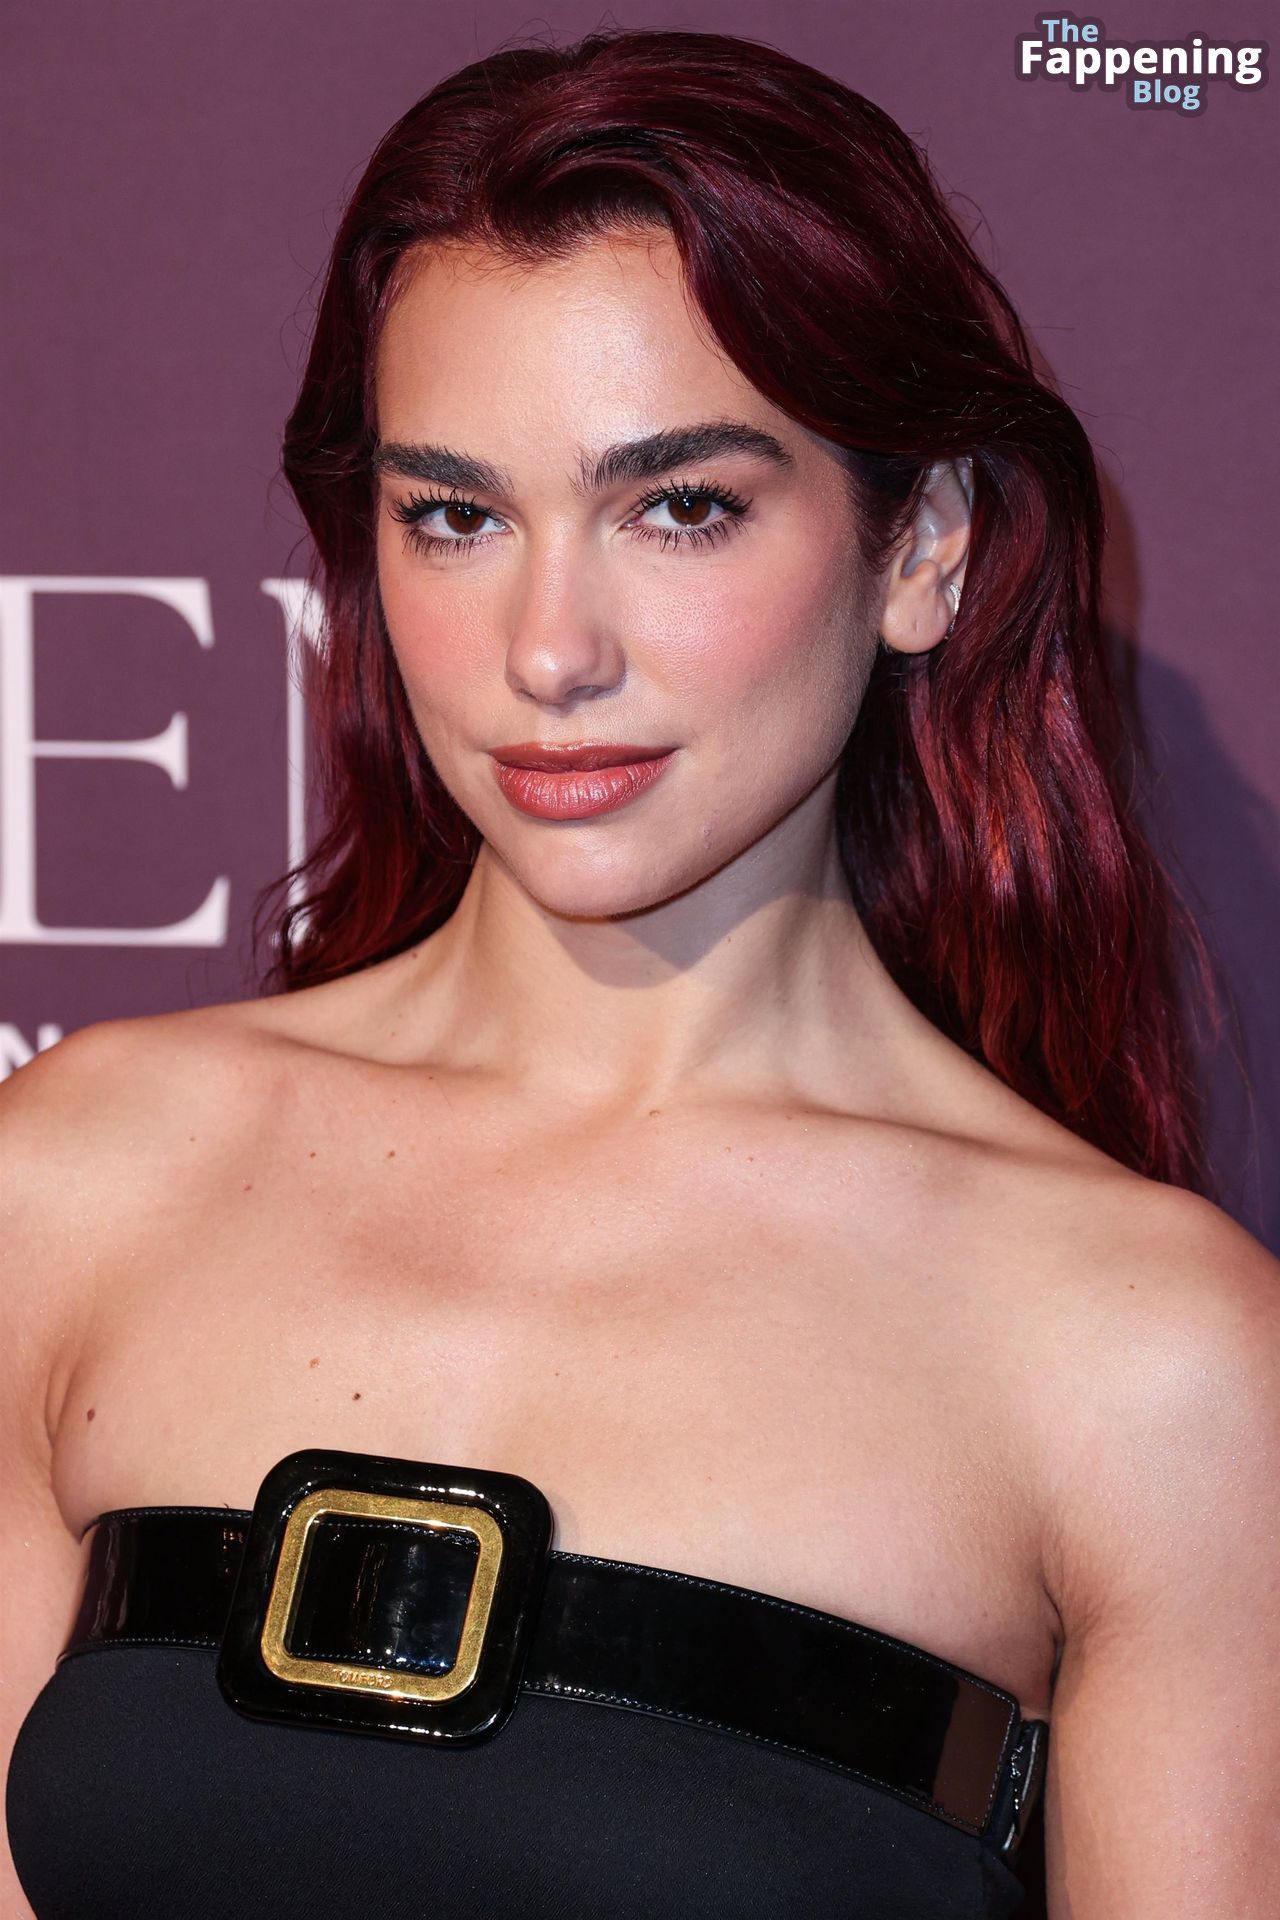 Dua Lipa Attends The Hollywood Reporter’s Women in Entertainment Gala (74 Photos)